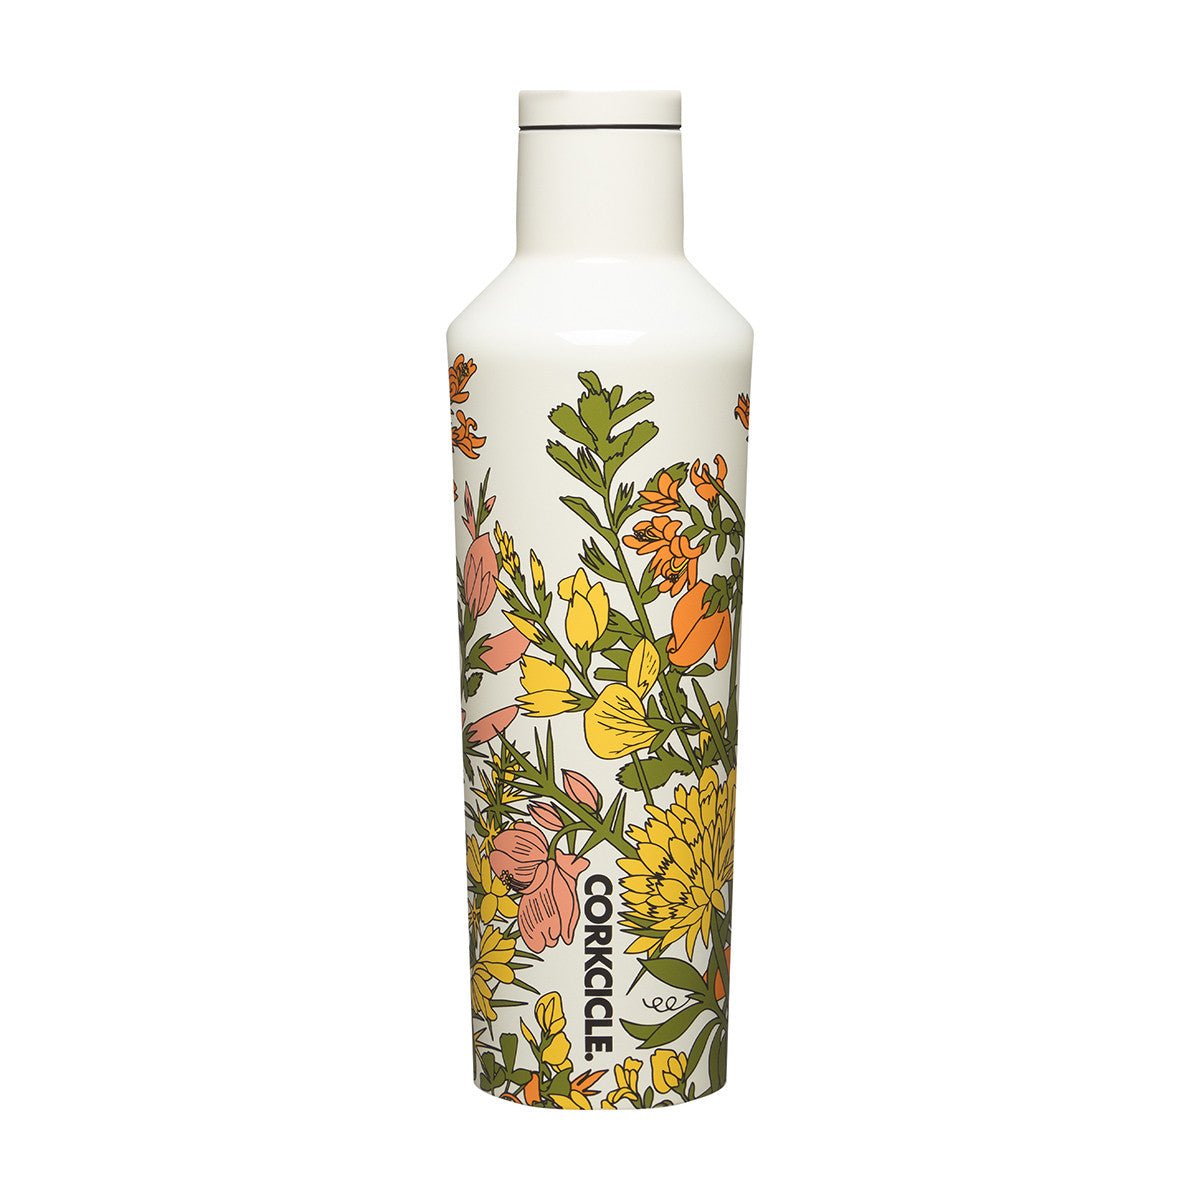 Corkcicle Patterned Canteen 475ml - Wildflower Cream Insulated Stainless Steel Bottle